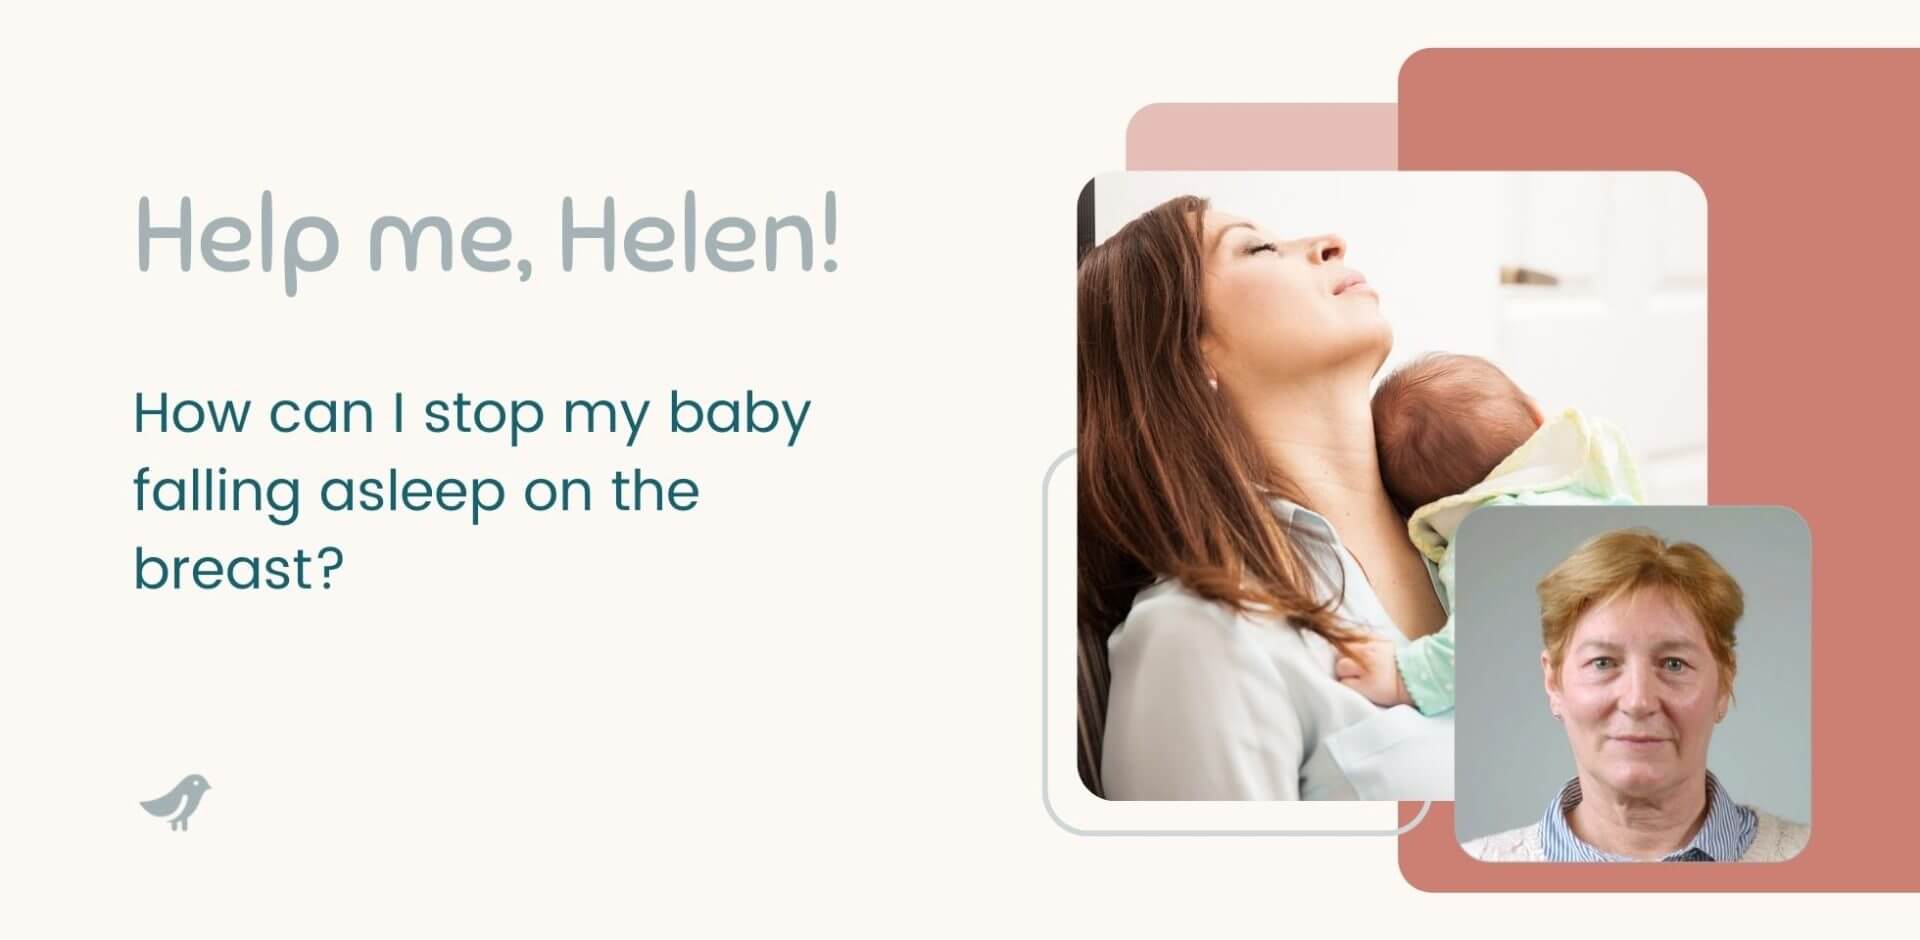 Help Me, Helen! How Can I Stop My Baby Falling Asleep on the Breast?